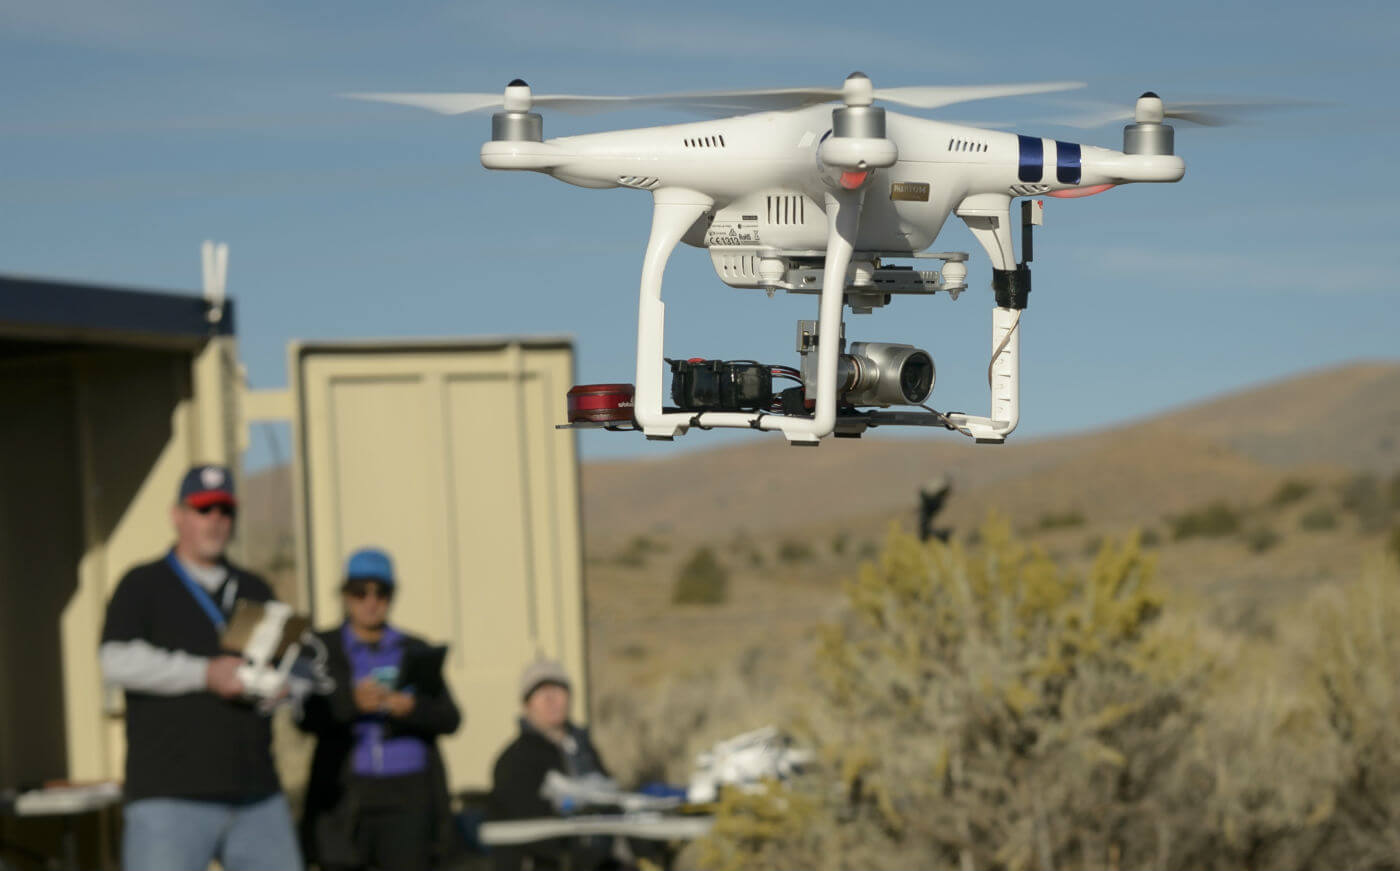 NASA’s ‘out-of-sight’ tests, conducted in coordination with the Federal Aviation Administration and several partners, were the latest waypoint in solving the challenge of drones flying beyond the visual line-of-sight of their human operators without endangering other aircraft. Frequentis Photo